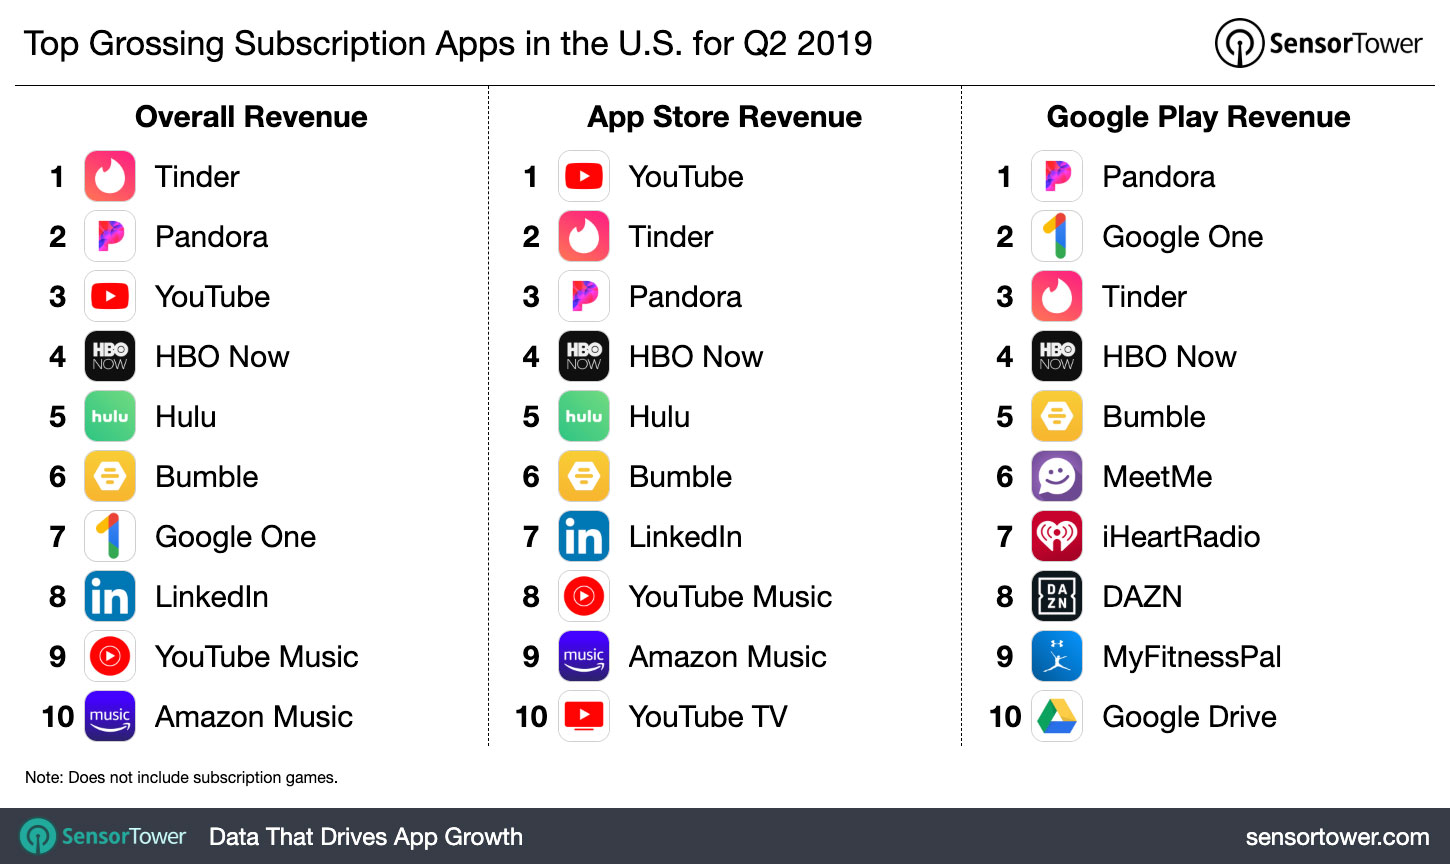 Top Grossing Subscription Apps in the U.S. for Q2 2019